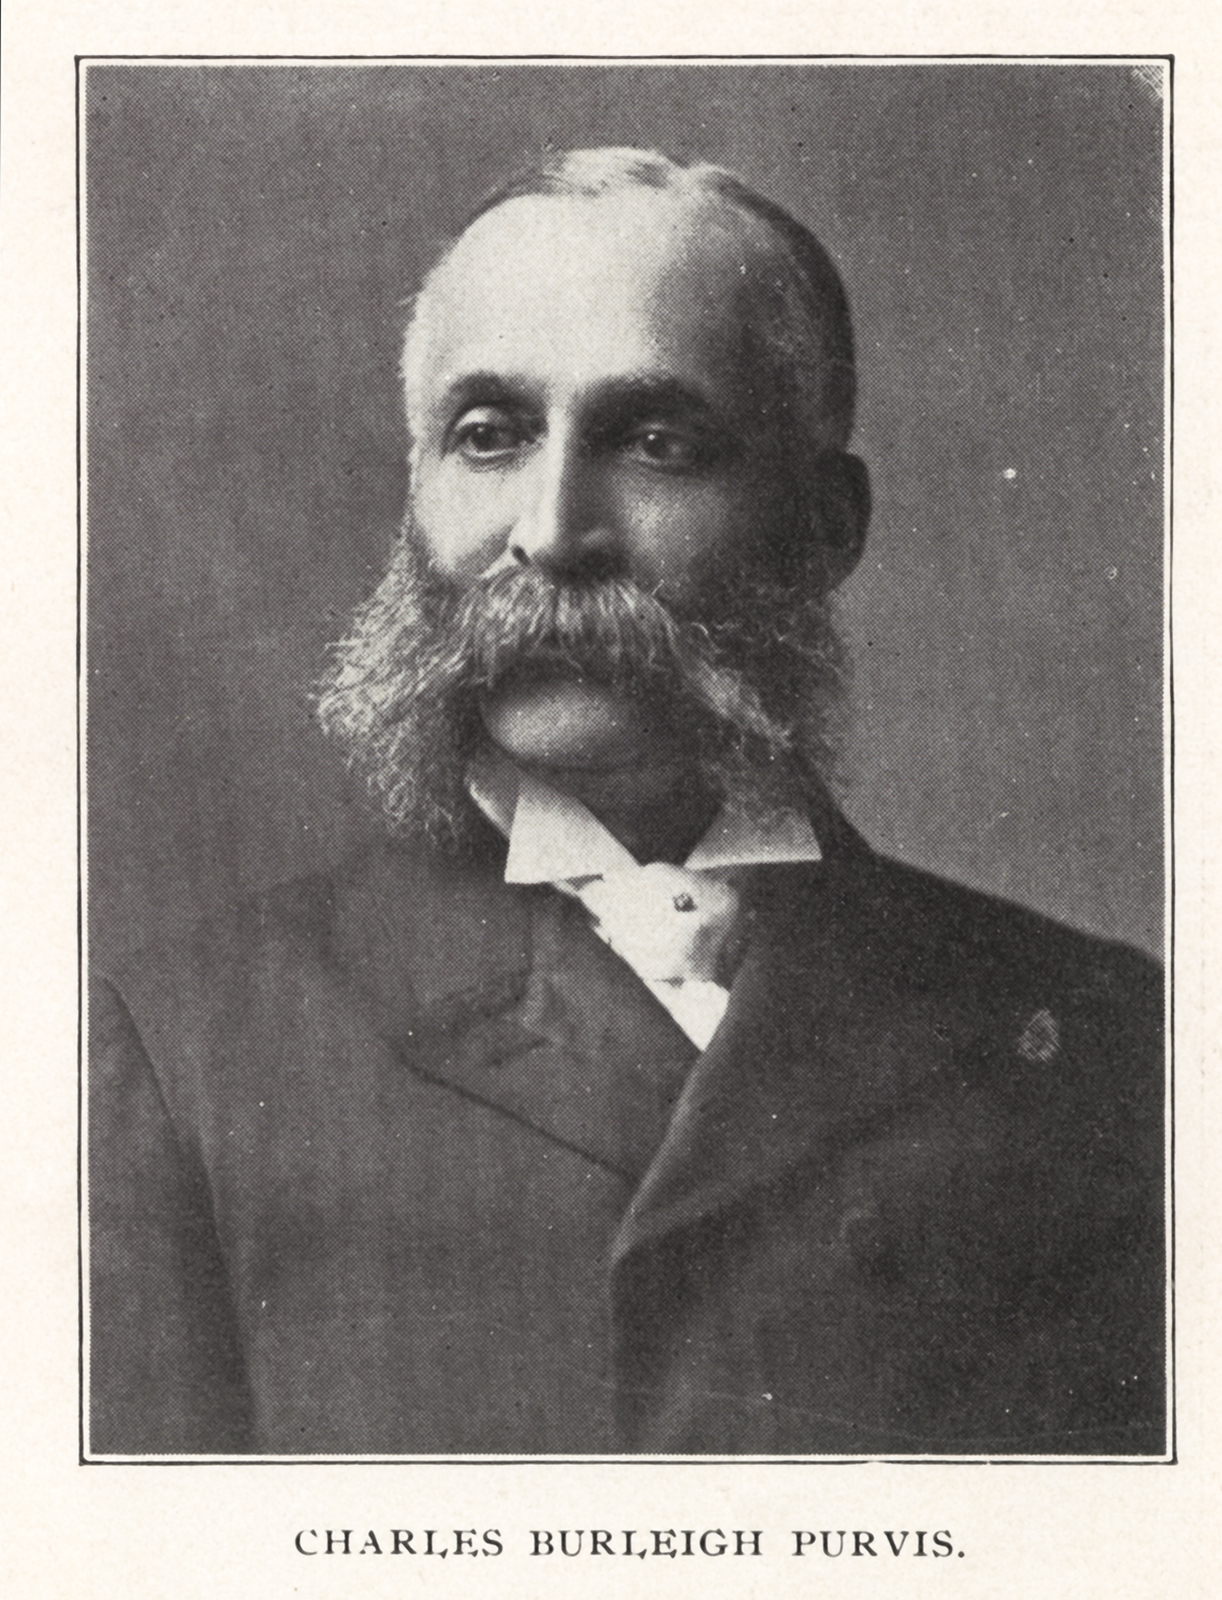 Portrait of Charles Burleigh Purvis, MD, ca. 1900. (National Library of Medicine)